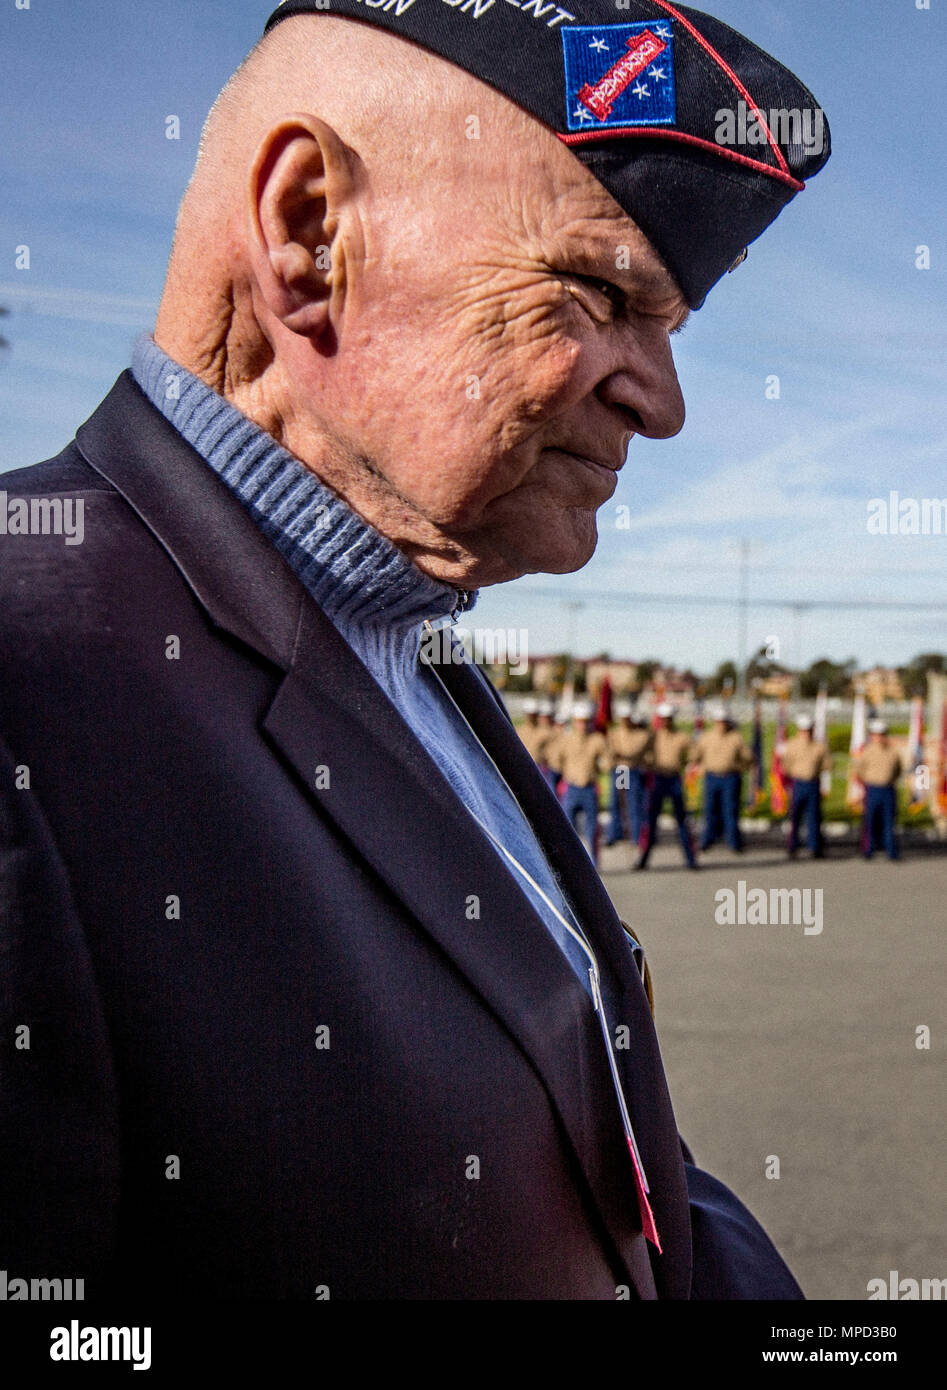 U.S. Marine Corps retired Col. James Williams attends the 76th anniversary of 1st Marine Division on Marine Corps Base Camp Pendleton, Calif., Feb. 2, 2017. Veterans, active duty Marines and Sailors who served in the division over the years participated in the ceremony celebrating the oldest, largest, and most decorated division in the Marine Corps. (U.S. Marine Corps photo by Lance Cpl. Rhita Daniel) Stock Photo